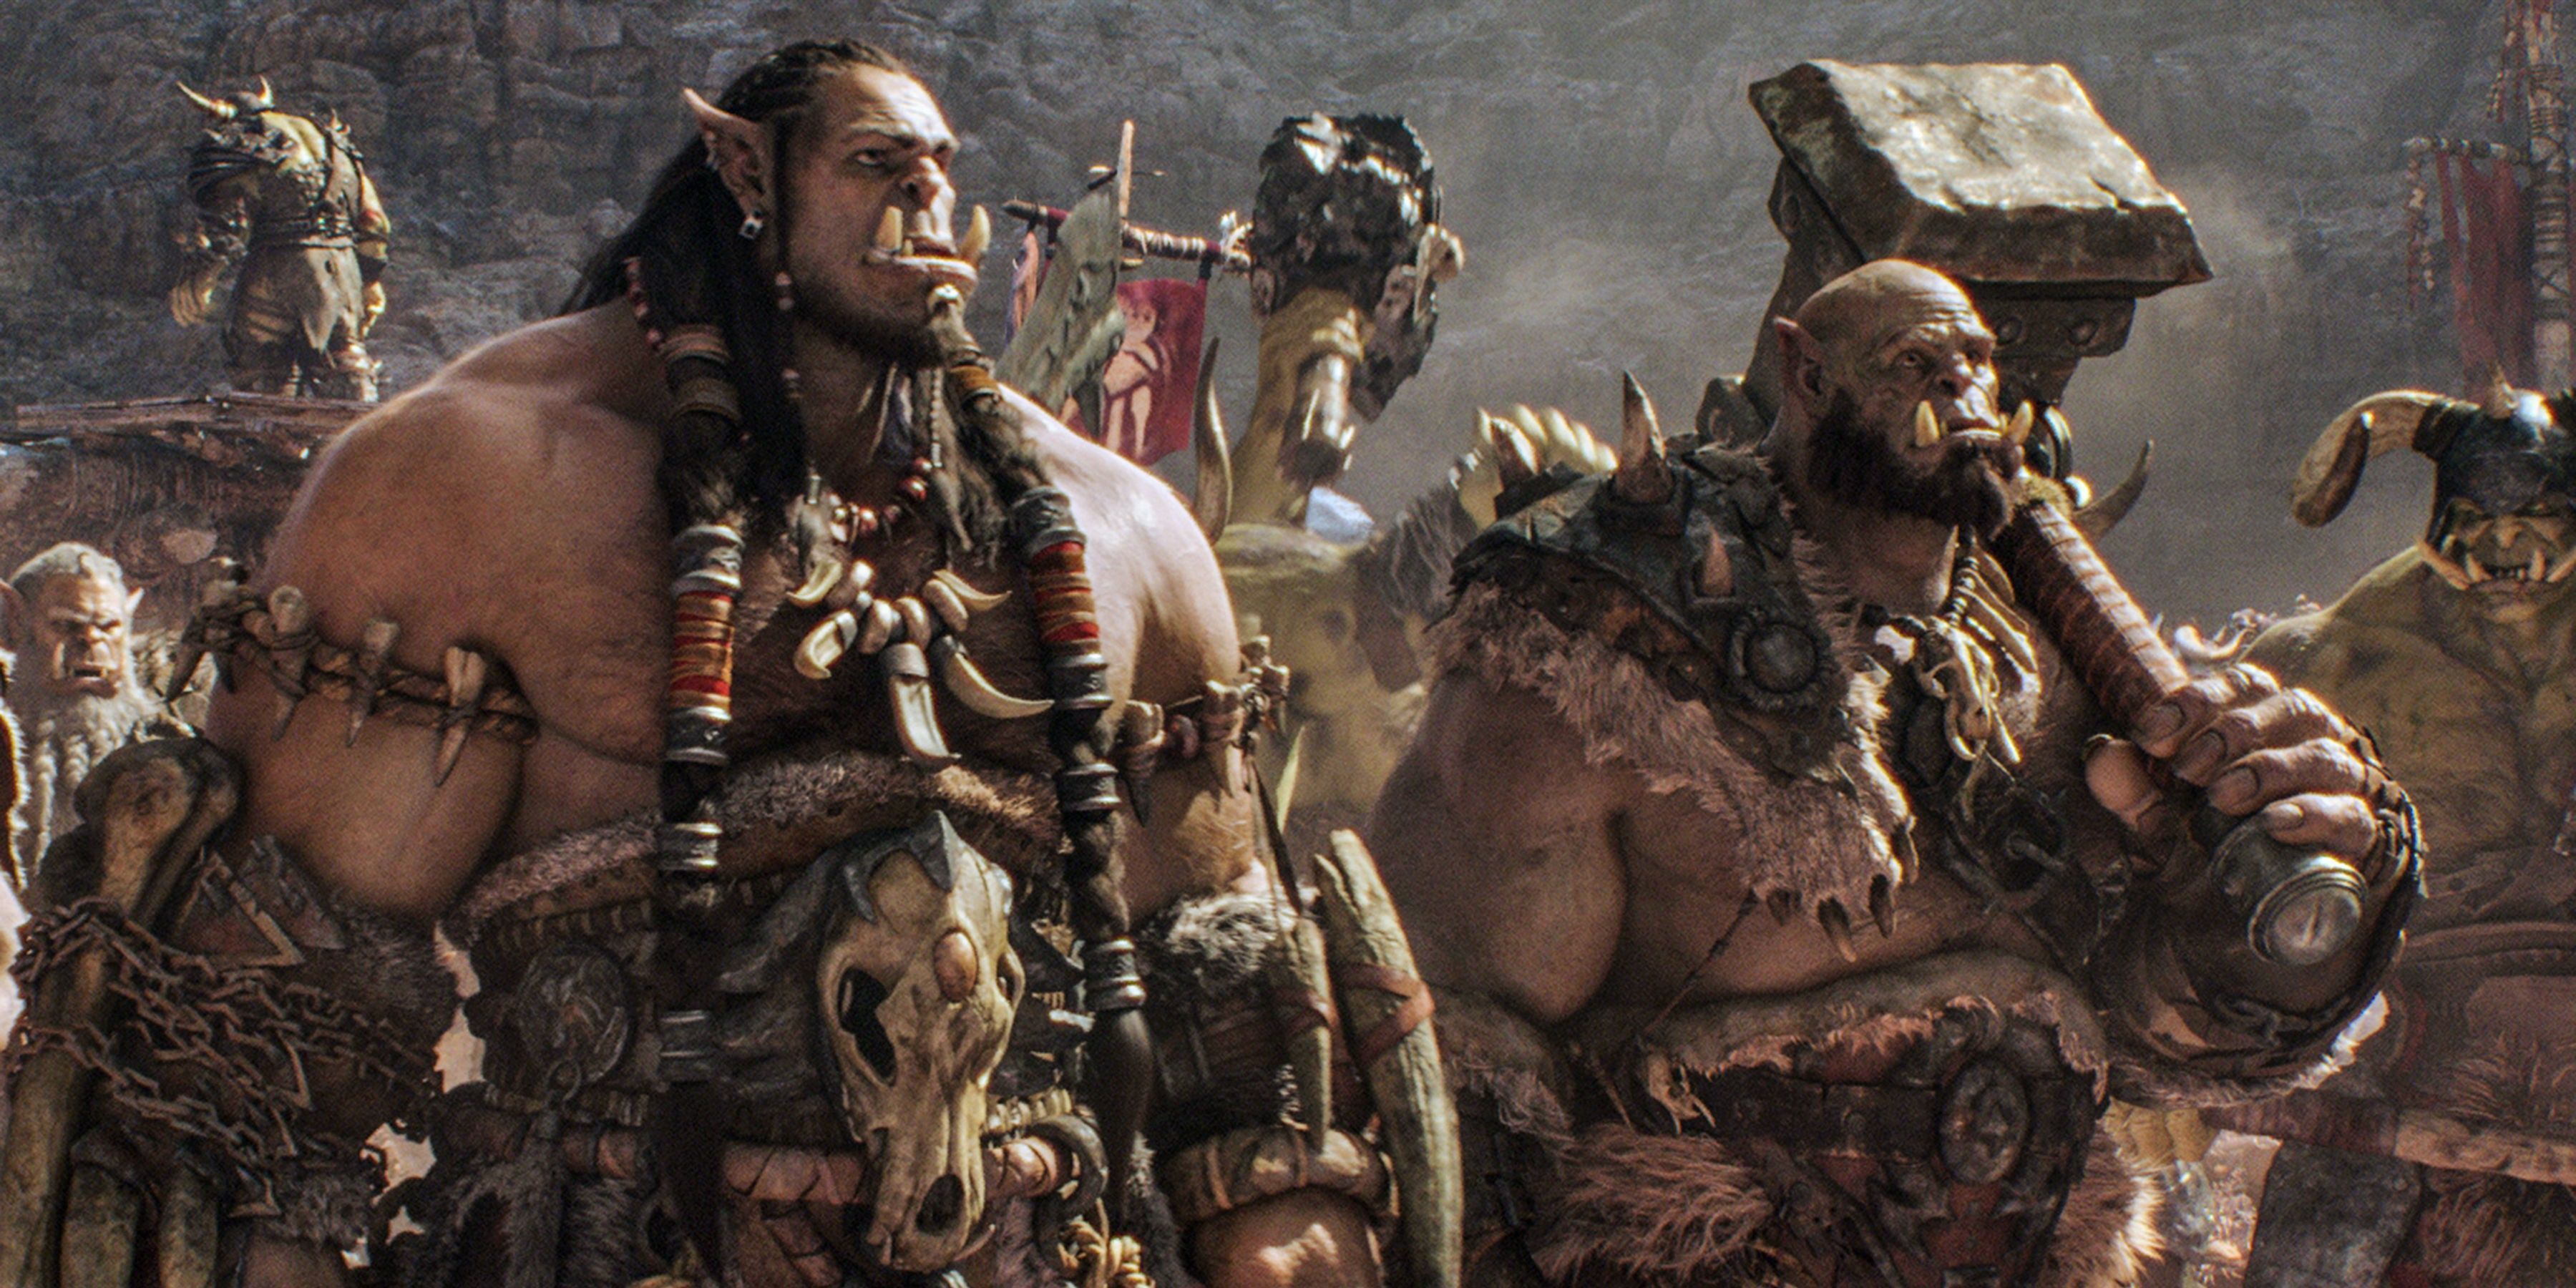 Warcraft Director No One Really Knows if Warcraft 2 Will Happen